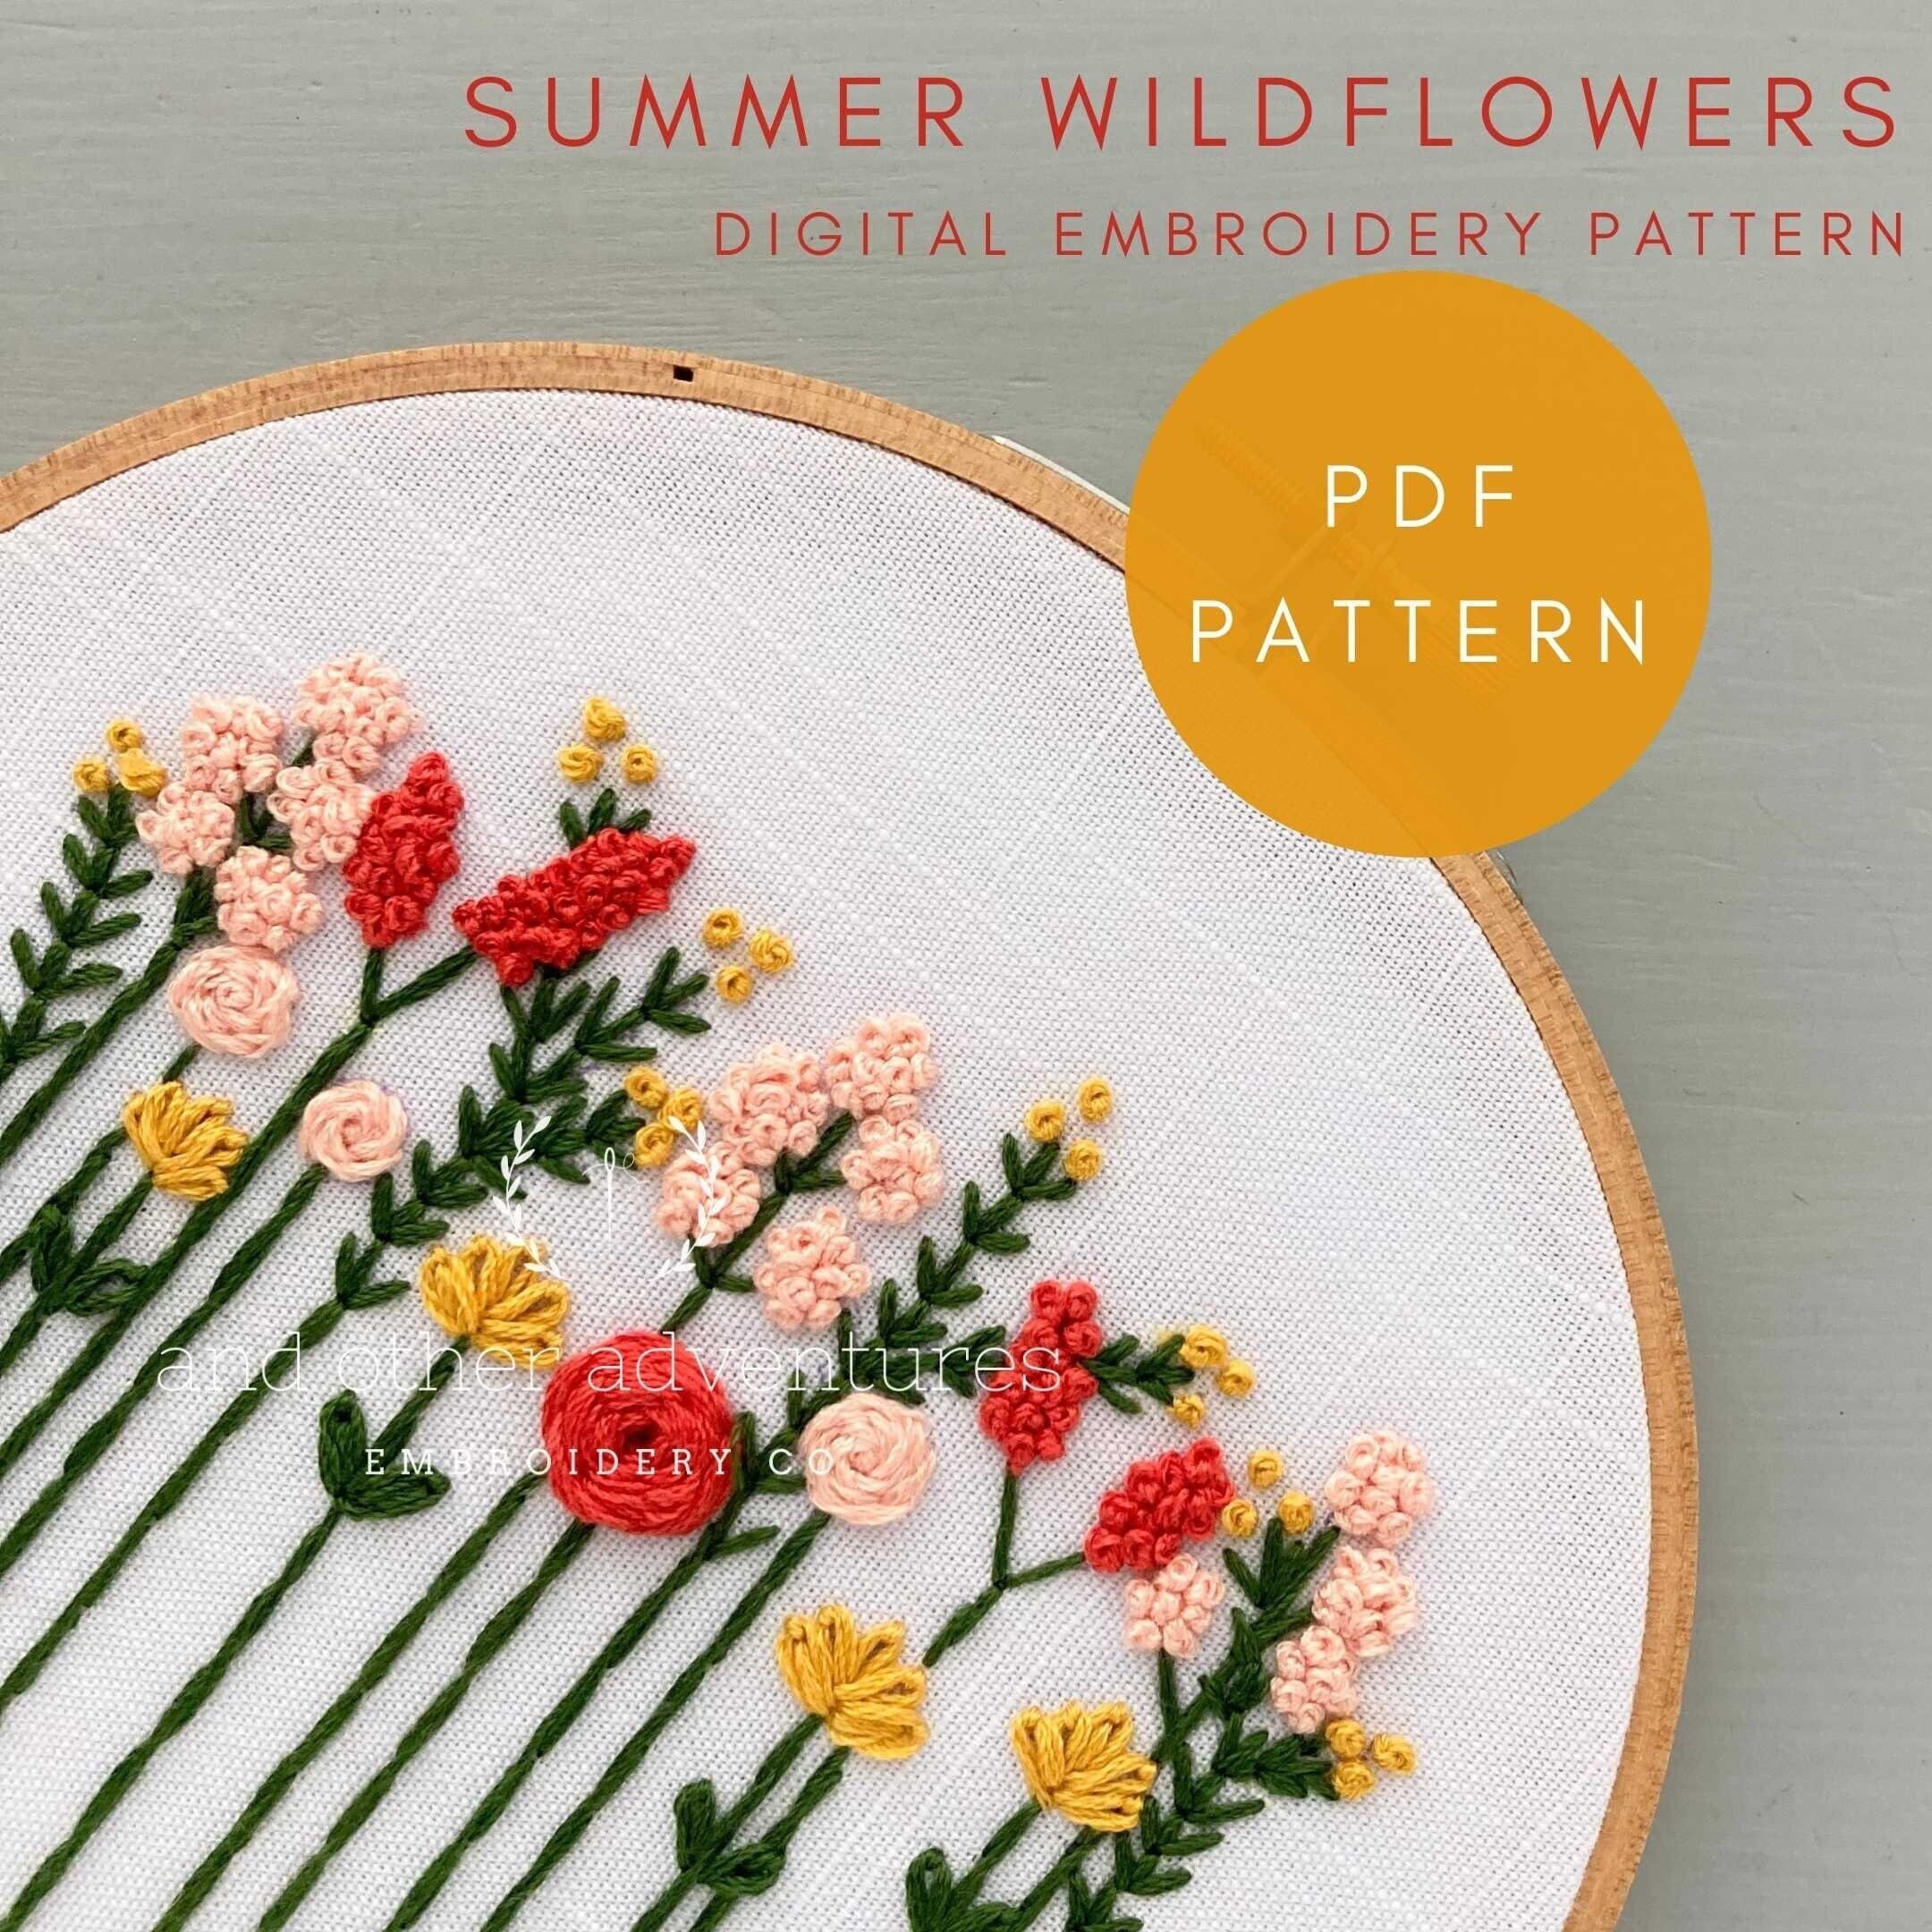 Sew Some Summer Fun!  Paper embroidery, Embroidery cards, Embroidery cards  pattern